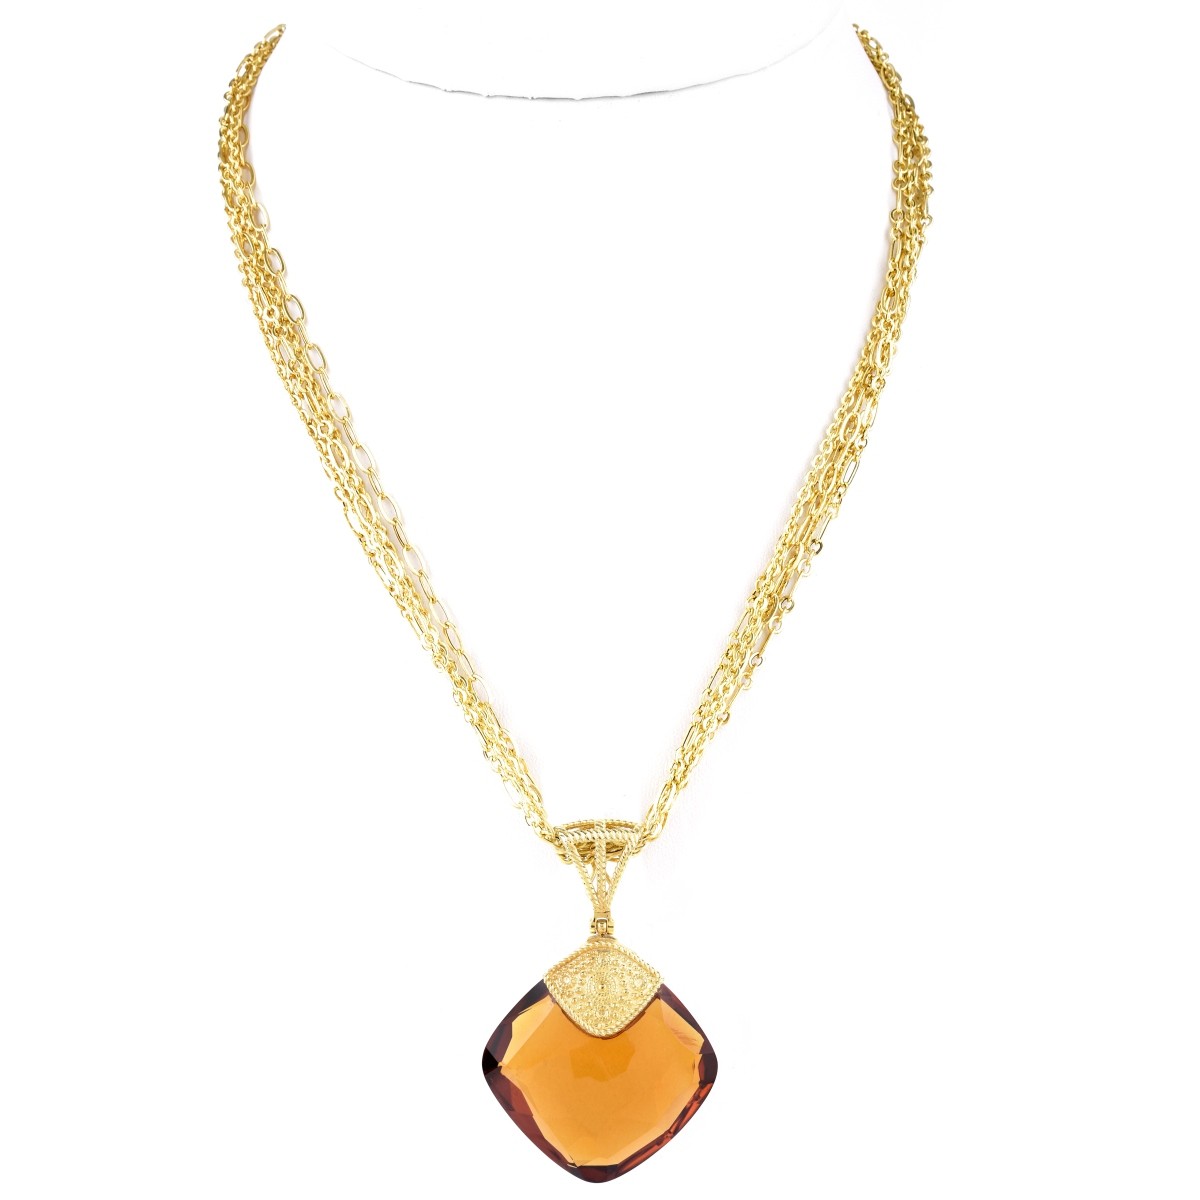 Italian Citrine and 14K Gold Necklace